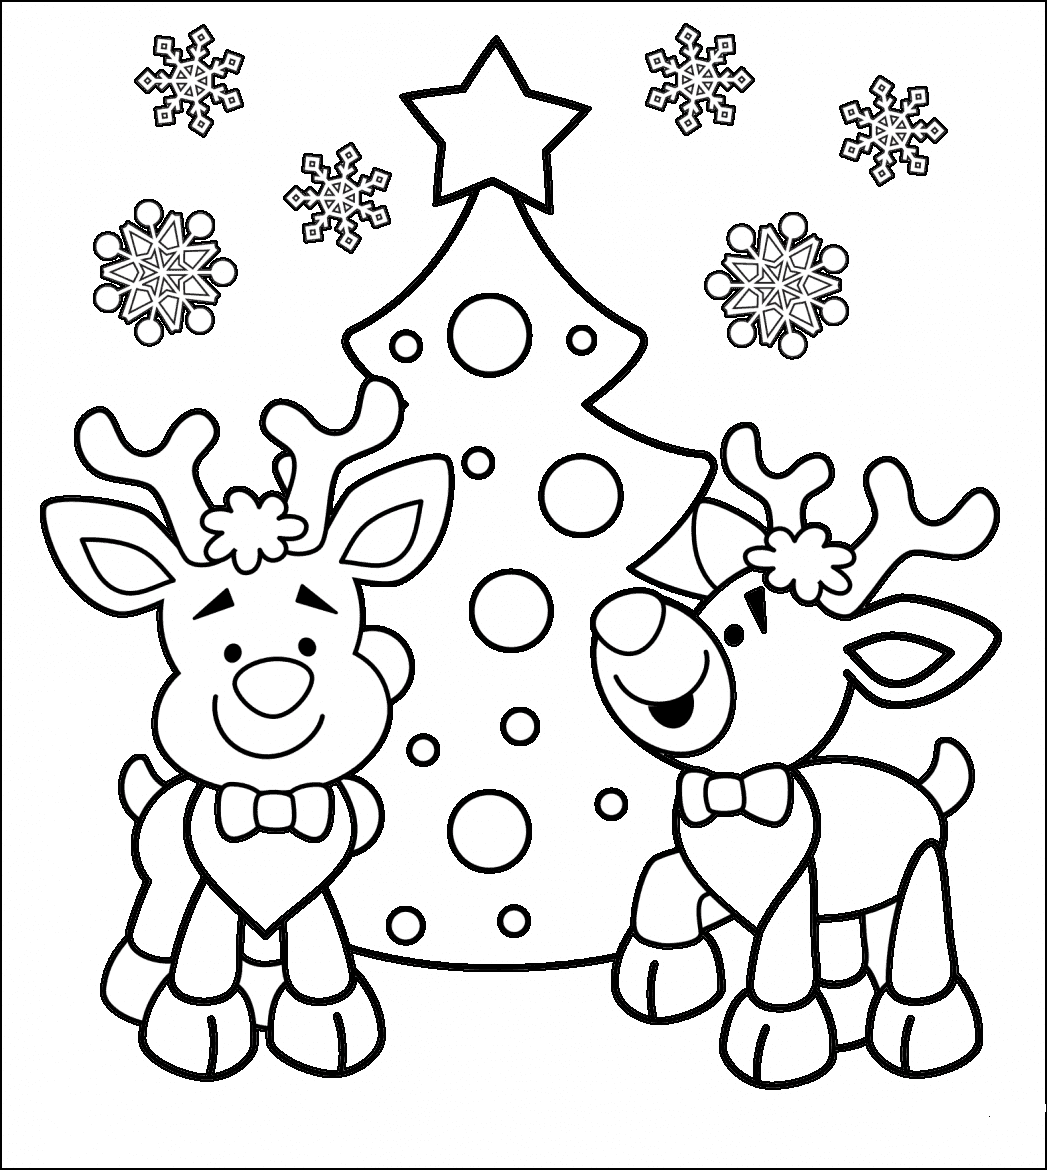 Christmas Cute For Children Coloring Page